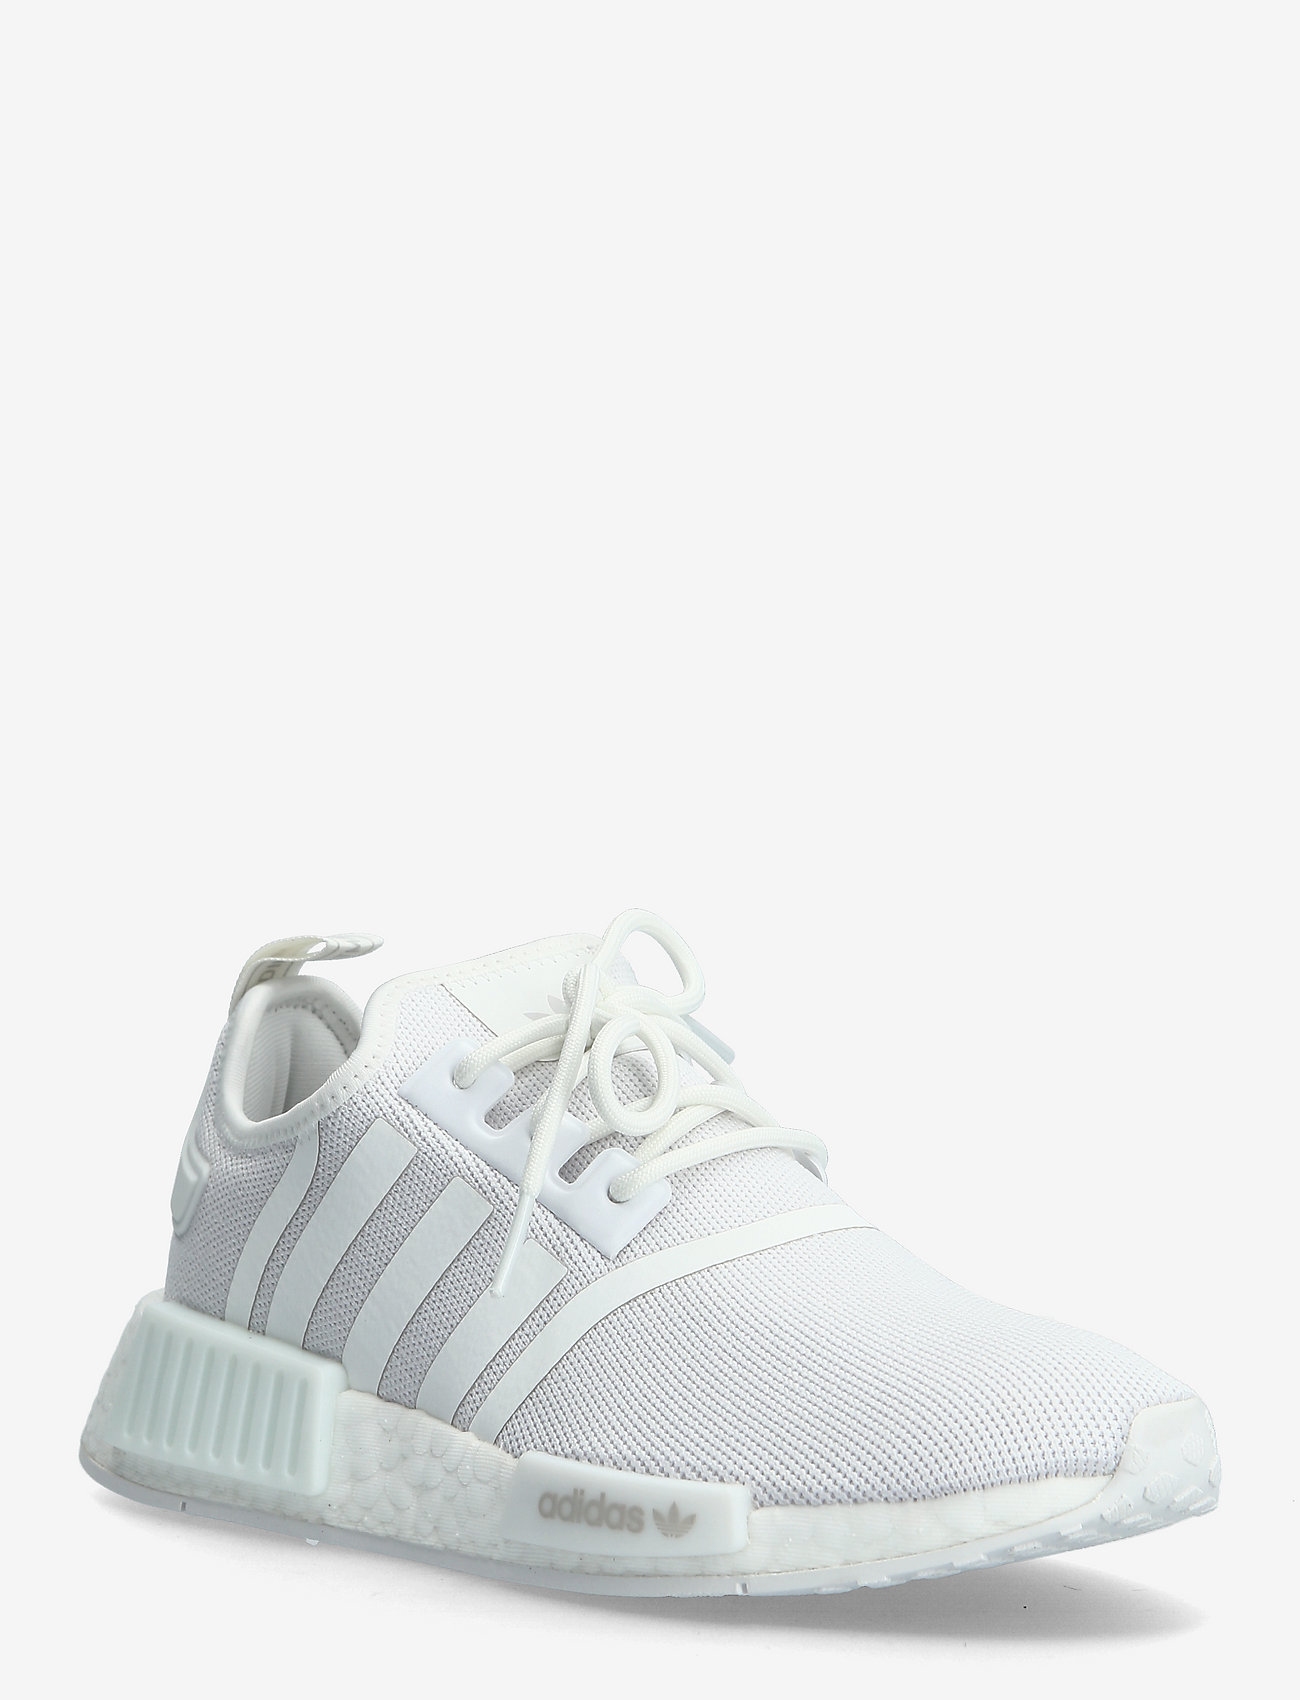 adidas Originals - NMD_R1 J - low-top sneakers - ftwwht/ftwwht/greone - 1